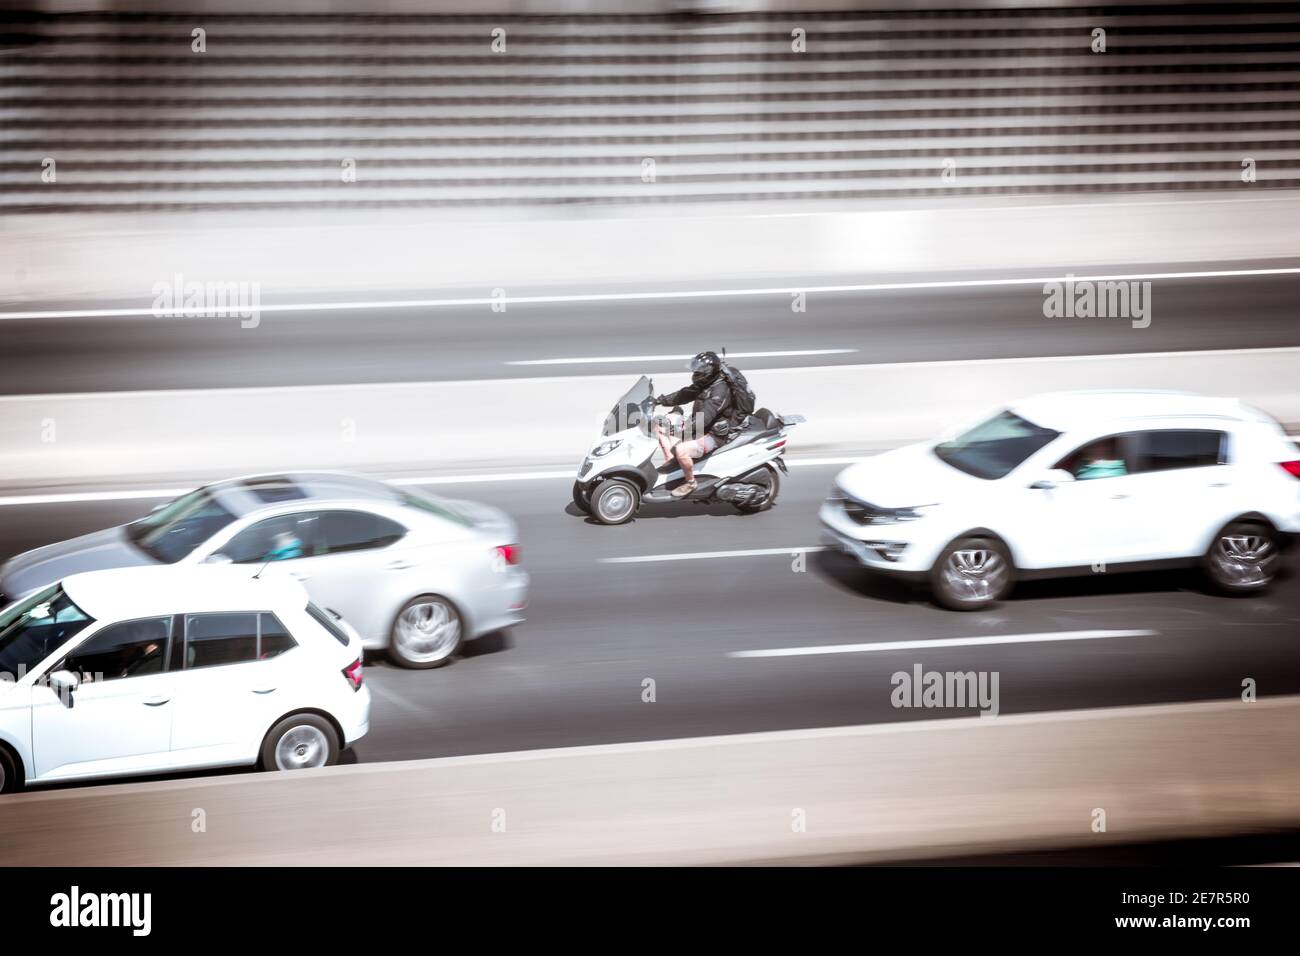 Touring car and motorcycle sweeping at speed in the city. Transportation concept. Stock Photo